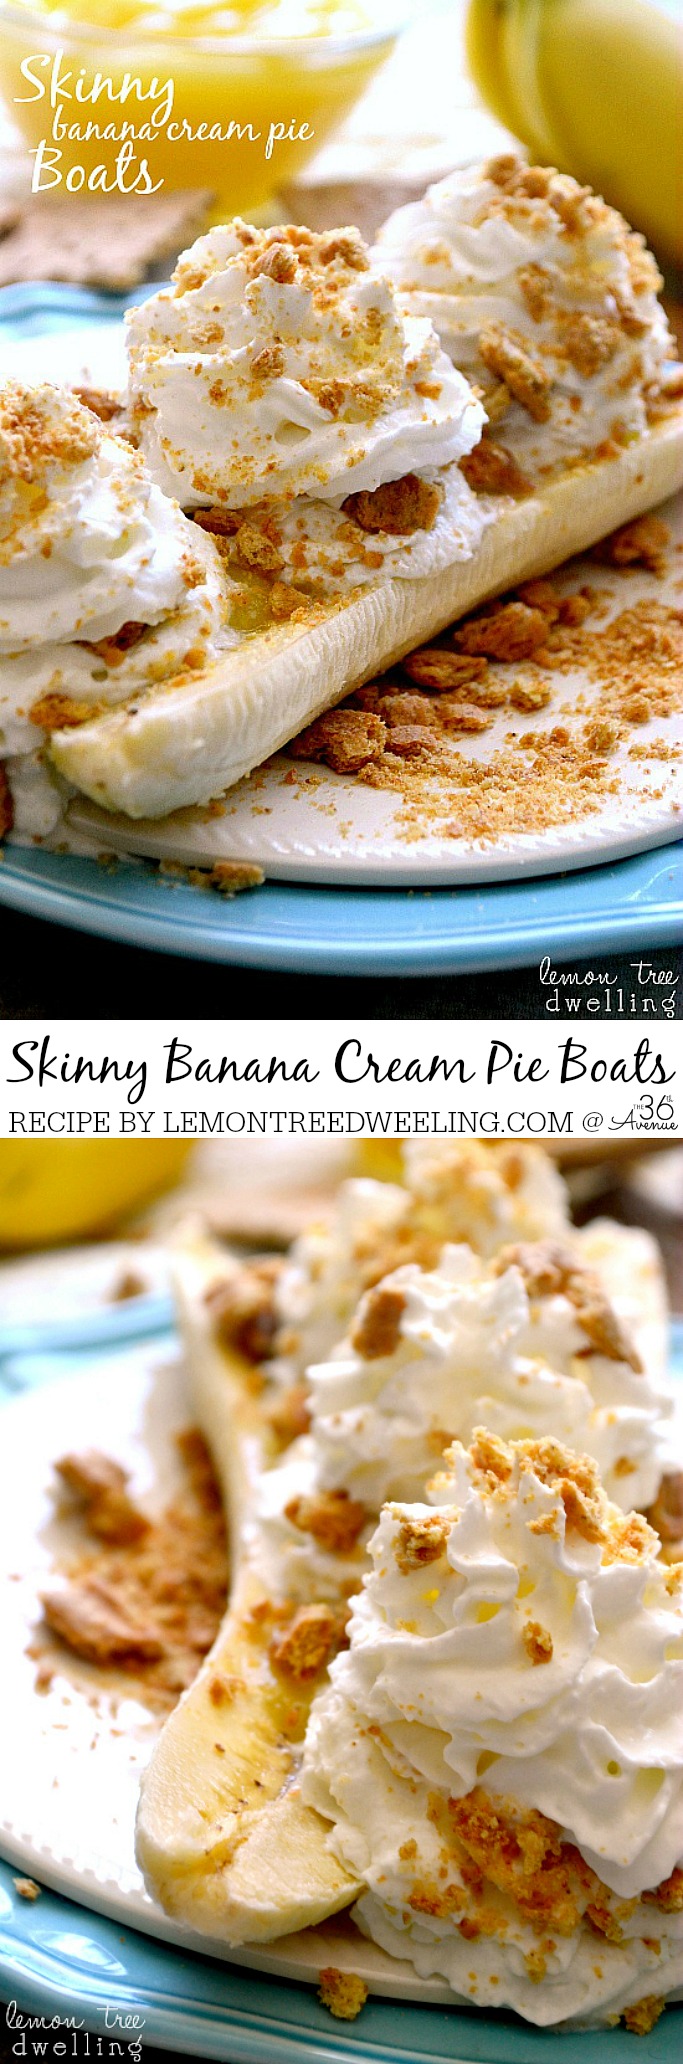 Recipes - Skinny Banana Cream Pie Boats - just 4 ingredients & a perfect (guilt-free) summer treat! lemontreedwelling.com